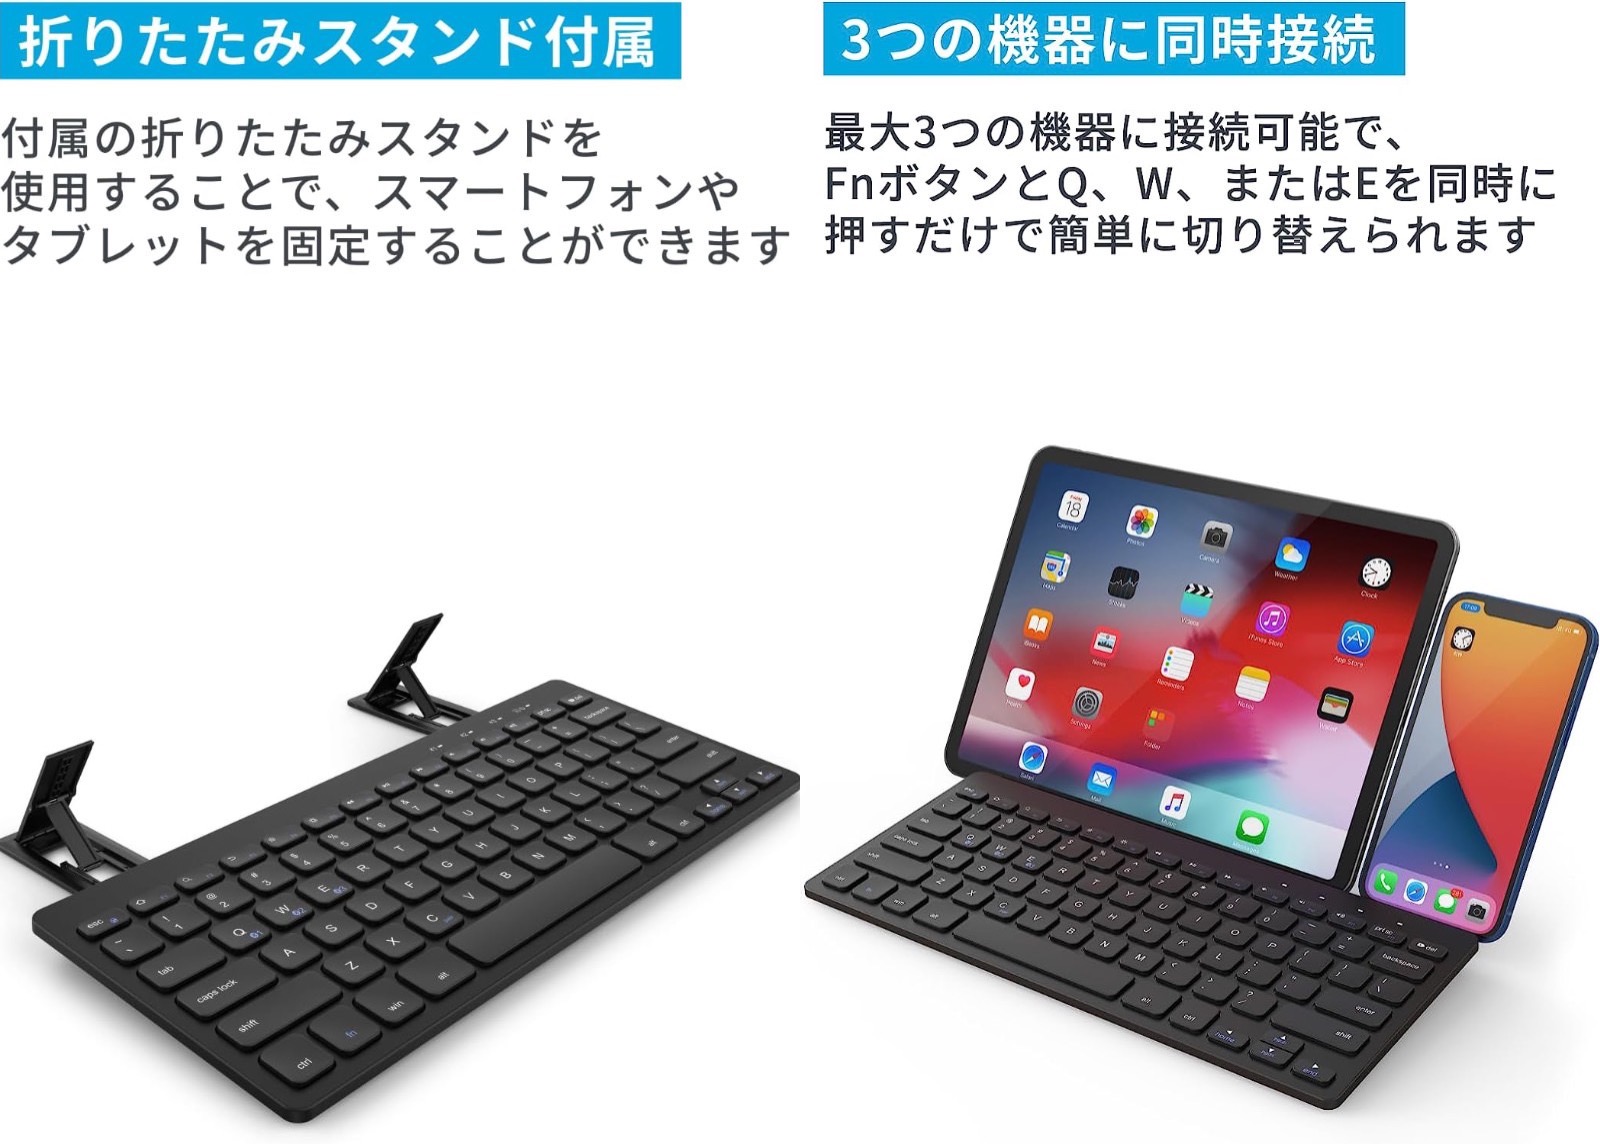 Features of compact keyboard